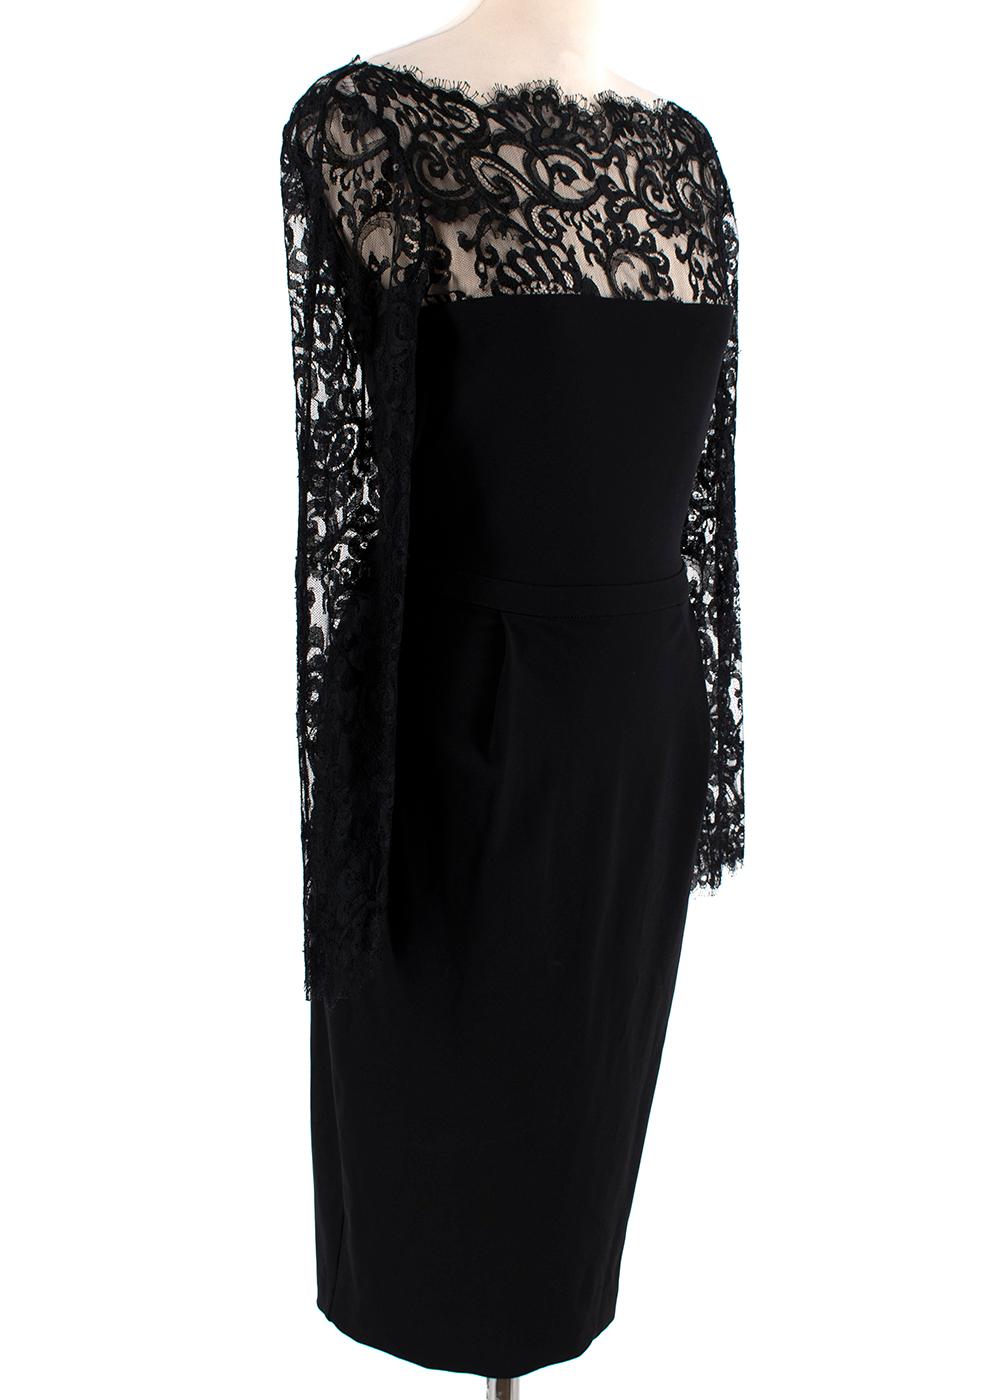 Gucci Black Lace Front Fitted Midi Length Dress

- Elegant black fitted dress
- Intricate lace detailing around neckline and arms 
- Eyelash lace trimming 
- Midi length 
- Back zip closure and button fastening at neck 
- Darted skirt